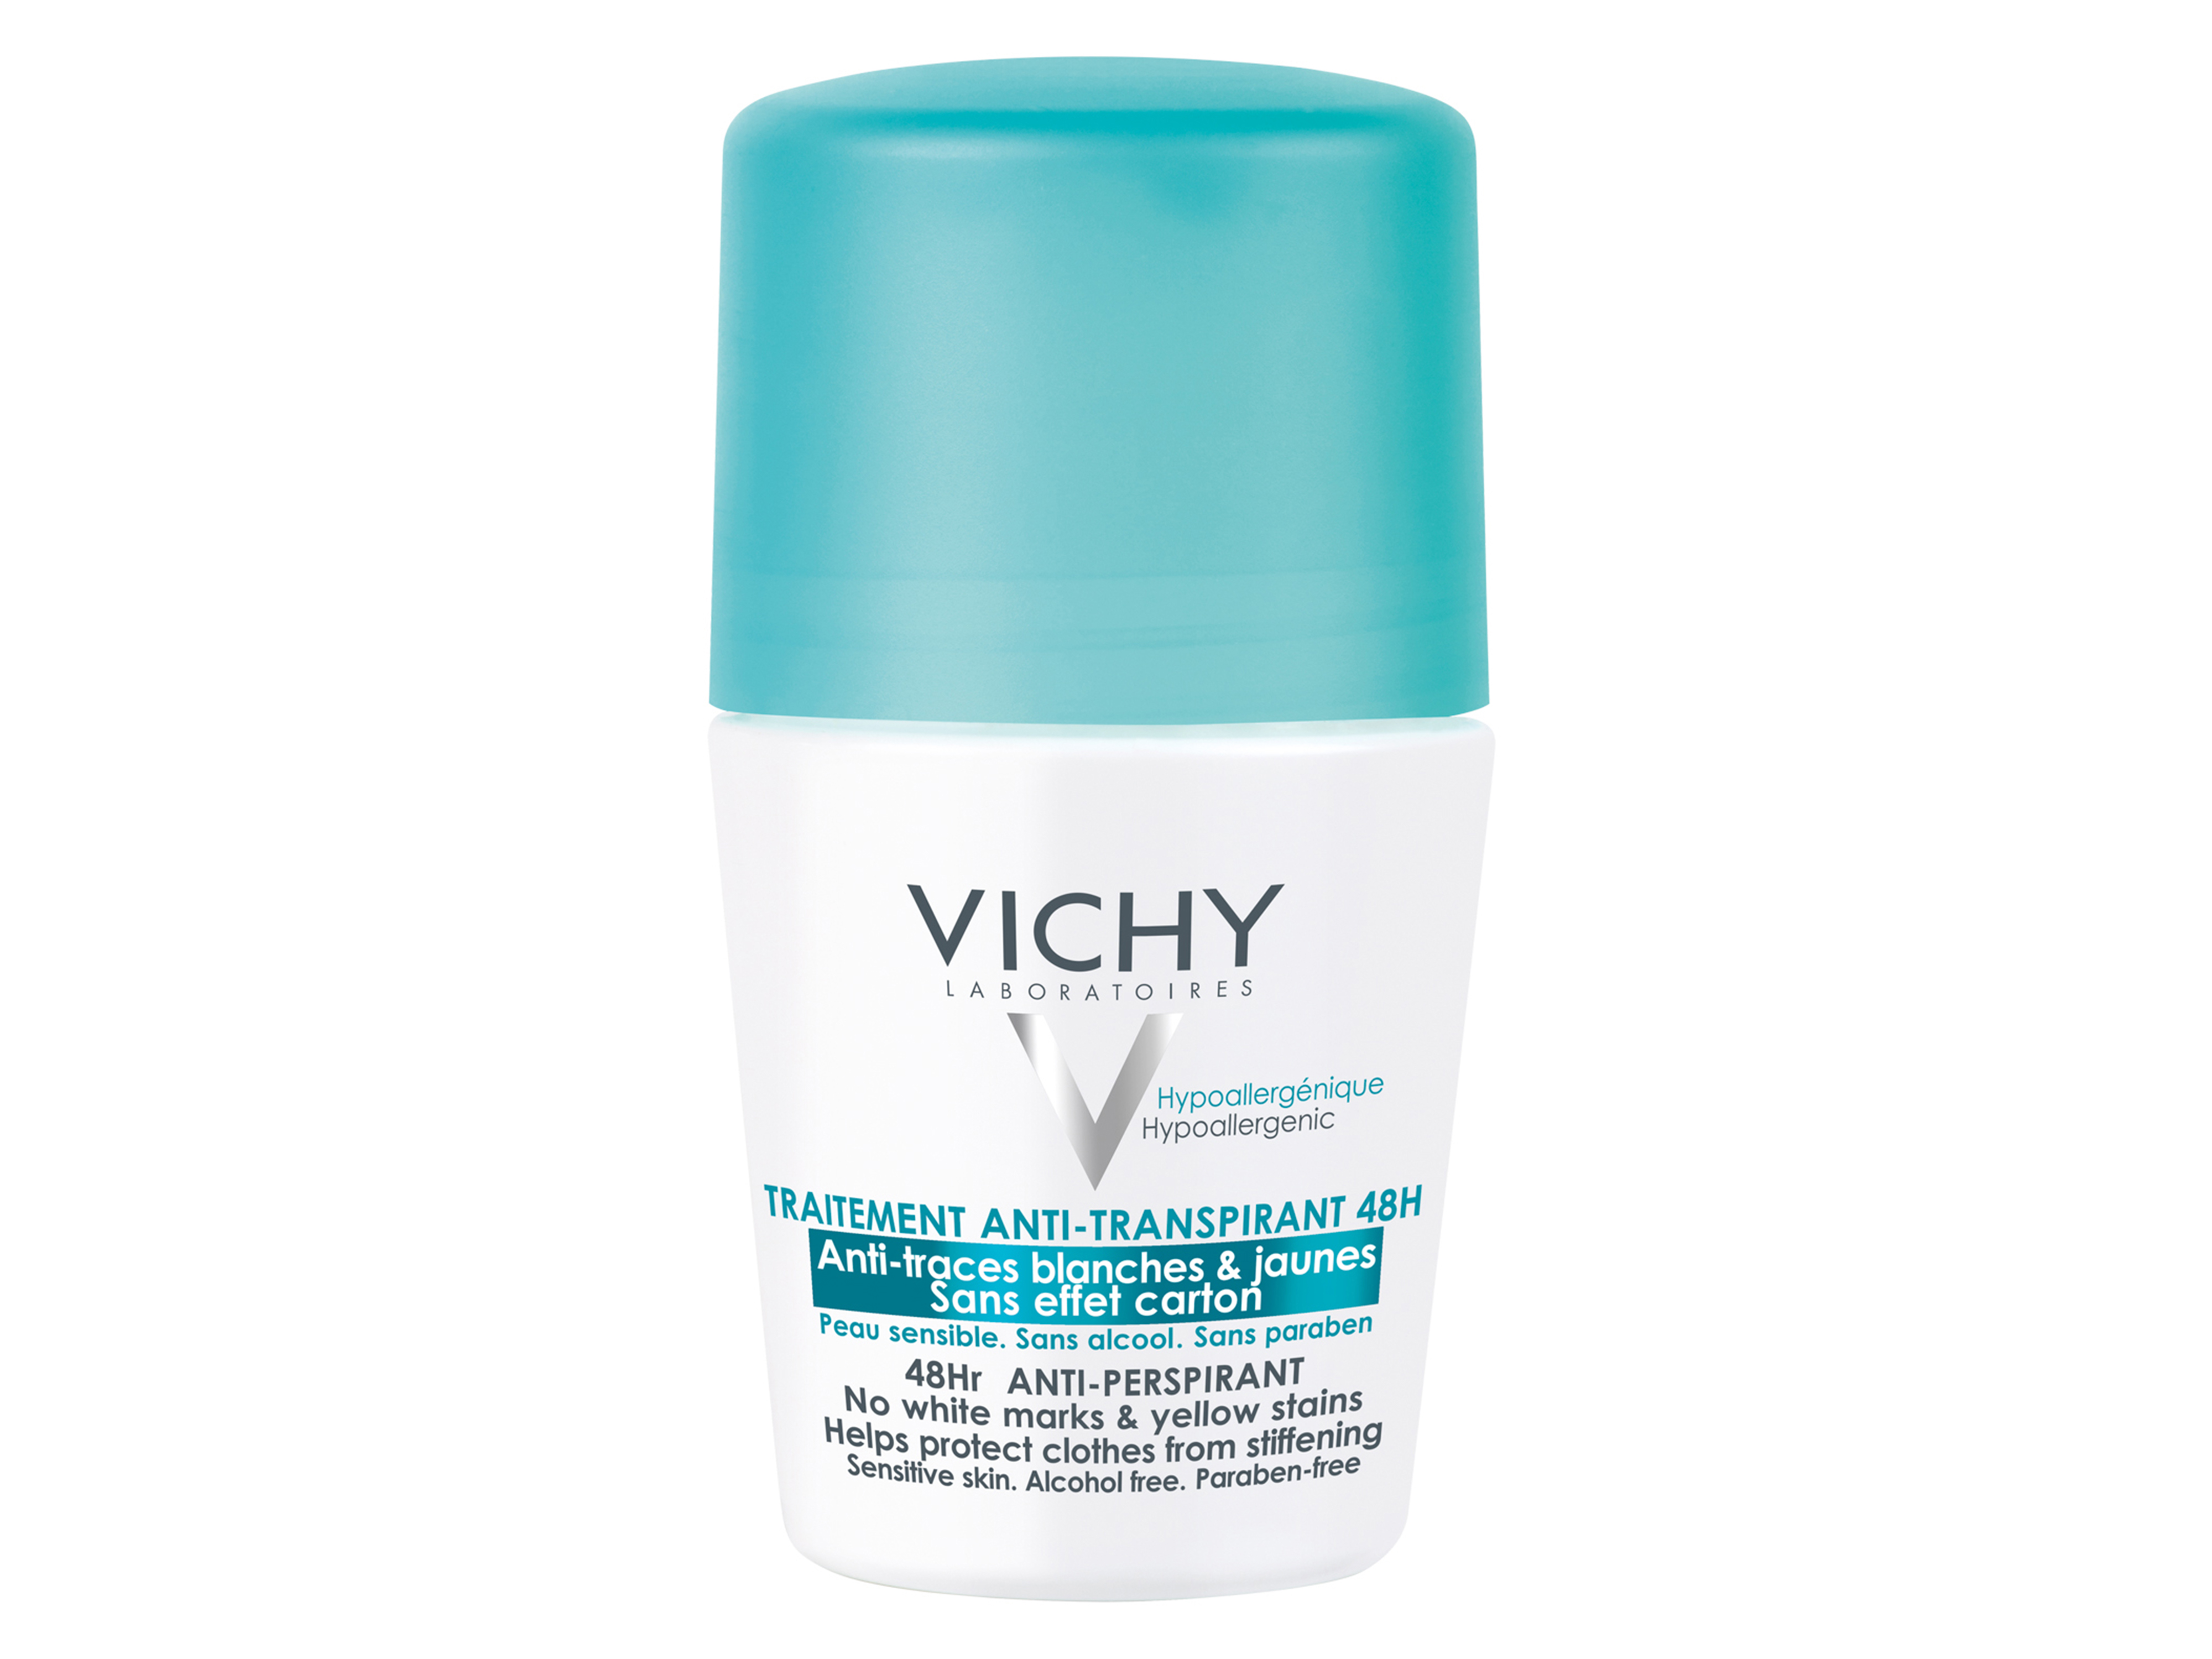 Vichy Anti-Trace 48Hr Anti-Perspirant, Med parfyme, 50 ml